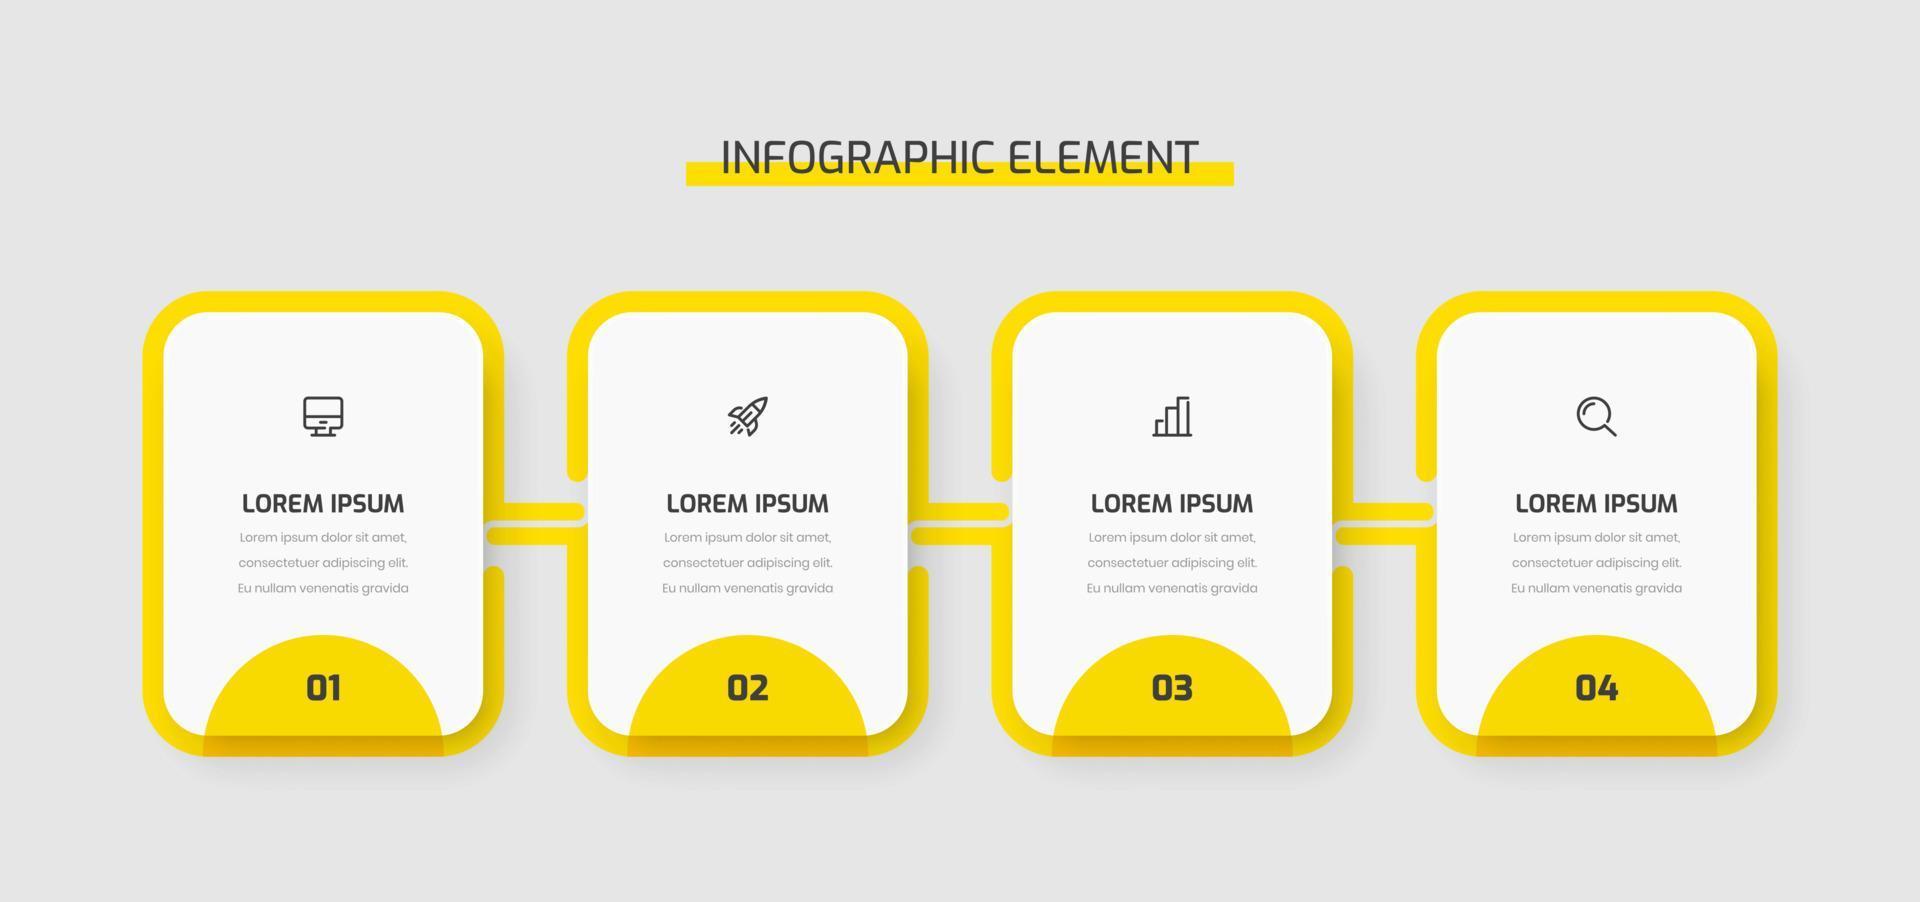 Timeline Infographic Template Design with Yellow Color, Rounded Rectangle, 4 Numbers and Icons. Can be Used for Process Diagram, Presentations, Workflow Layout, Banner, Flow Chart vector